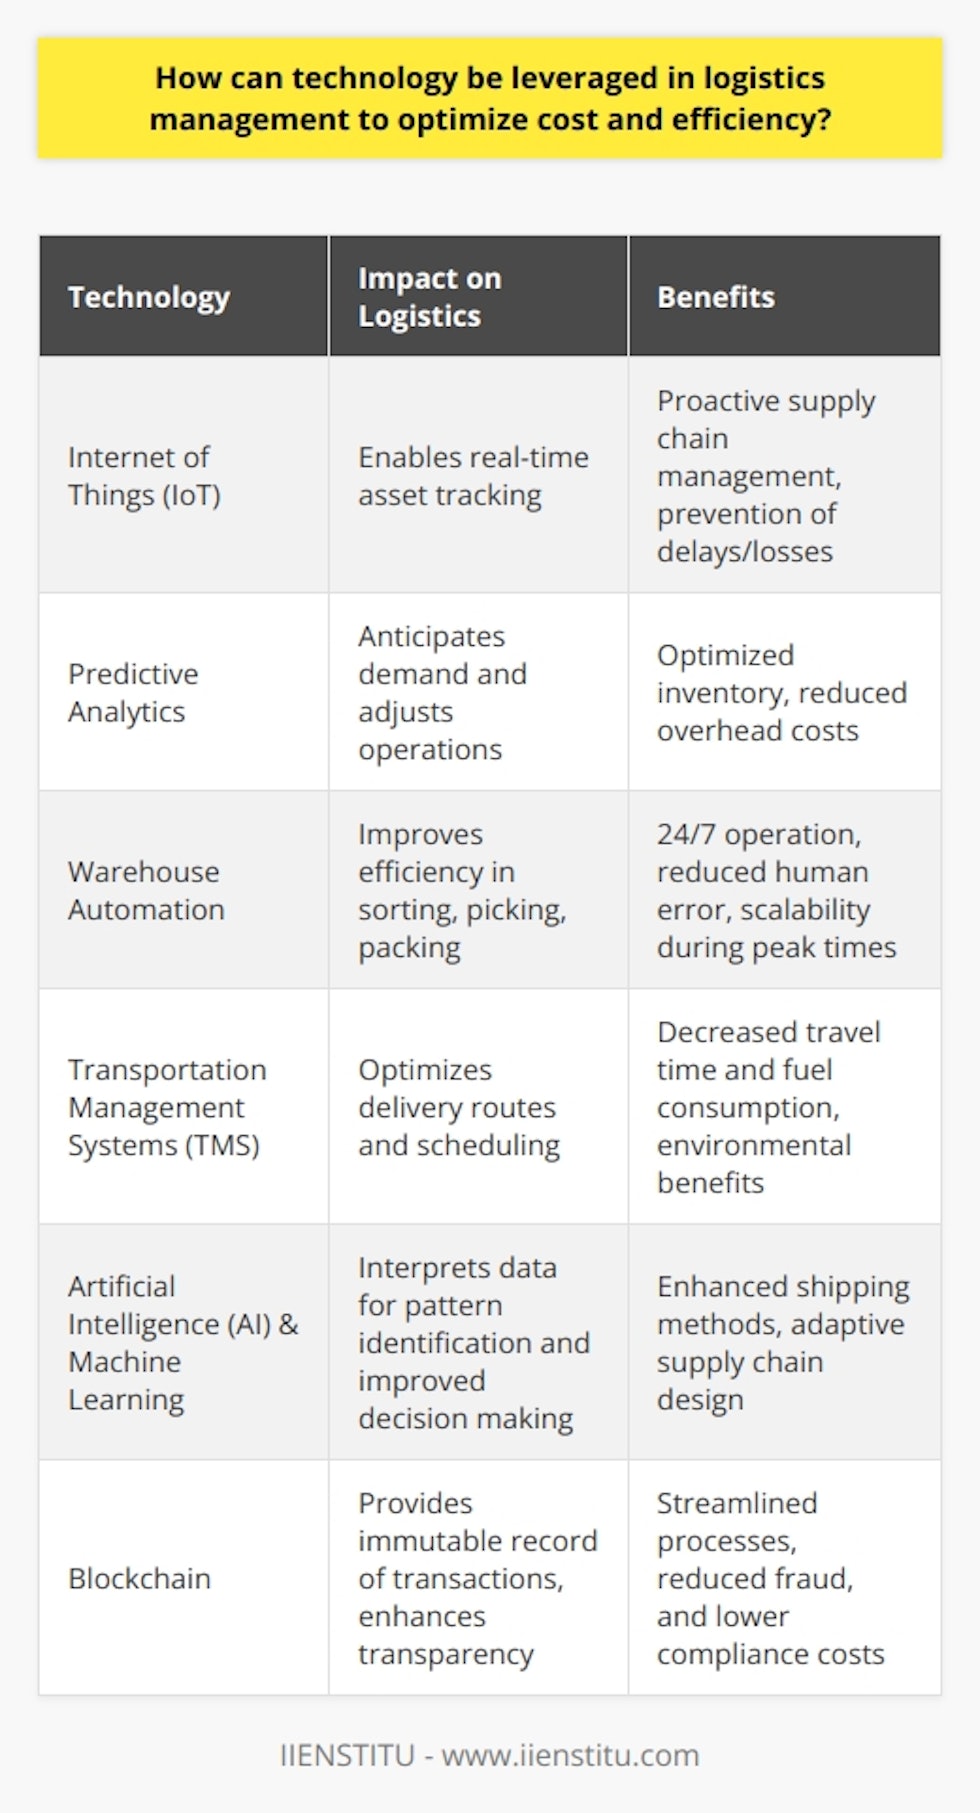 Technology integration within the realm of logistics management is not just a trend but a fundamental shift necessary for businesses to maintain their competitive edge. Here, we delve into several technologies that are transforming the logistics landscape, focusing on efficiency and cost optimization.**Enhanced Tracking with IoT**The Internet of Things (IoT) has dramatically improved the capability of firms to track assets in real-time. IoT sensors placed on containers, pallets, or individual products provide a constant stream of data, informing logistics managers of the exact location, condition, and progress of their goods. This immediate access to information allows for proactive management of the supply chain, potentially averting costly delays and losses.**Forecasting Through Predictive Analytics**Predictive analytics is a game-changer in logistics, allowing companies to anticipate demand and adjust their operations accordingly. By analyzing data trends, logistics professionals can predict peak periods, stock levels, and delivery demands before they happen, achieving a more proactive rather than reactive approach. This leads to optimized warehouse space usage and inventory levels, leading to substantial savings.**Warehouse Automation's Contributions**Integrating high-tech solutions such as robotics and automated storage and retrieval systems can revolutionize warehouse operations. These mechanized assistants work around the clock, picking, packing, and sorting goods with greater precision and speed than human workers. They can scale operations quickly in response to demand surges, which is particularly beneficial during peak seasons.**Optimizing Routes with Technology**With advanced Transportation Management Systems (TMS), logistics operators can find the best possible delivery routes. By analyzing data like real-time traffic reports, weather forecasts, and delivery windows, TMS can plan routes that minimize travel time and fuel consumption, providing a swift and green alternative to traditional methods.**AI and Machine Learning for Smarter Logistics**Artificial intelligence (AI) and machine learning interpret large sets of logistics data to find patterns that can improve efficiency. AI algorithms can suggest the best shipping methods, forecast future shipment volumes, and even recommend changes to supply chain design. These technologies allow logistics companies to be more adaptive and intelligent in their decision making.**Blockchain: A New Era of Transparency**Blockchain technology is poised to revolutionize supply chain transparency by offering an immutable record of transactions. In logistics, this means every movement of goods can be accurately recorded and verified by all parties in real-time, from manufacturers to end consumers. This level of transparency can streamline processes, cut down on fraud, and reduce overheads associated with documentation and compliance.In wrapping up, the integration of cutting-edge technologies such as IoT, predictive analytics, automation, TMS, AI, and blockchain into logistics management creates a synergy that drives down costs while amplifying efficiency. As the industry continues to grow and evolve, these technologies will become even more vital for companies that wish to maintain efficiency and manage costs effectively, ensuring they are well-positioned to meet the challenges of the future.